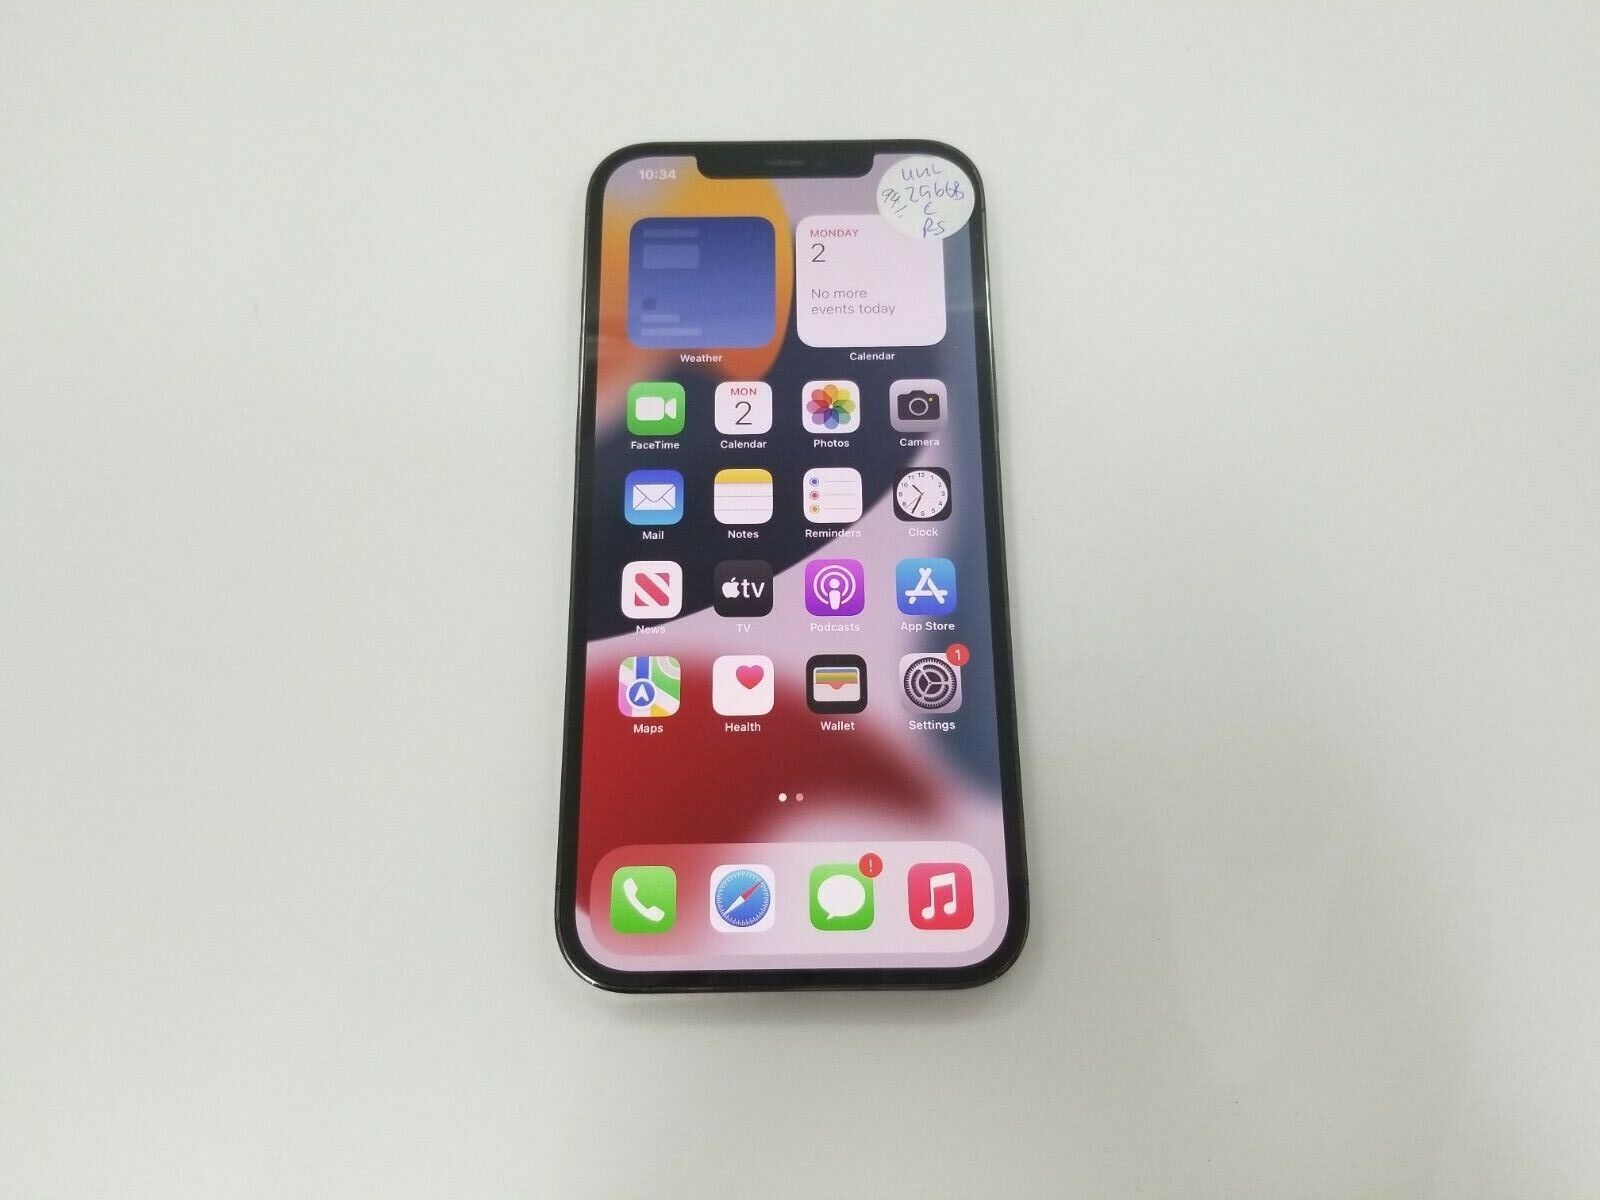 The Price of Apple iPhone 12 Pro Max A2342 256GB Unlocked Check IMEI Fair -RJ8664 | Apple iPhone